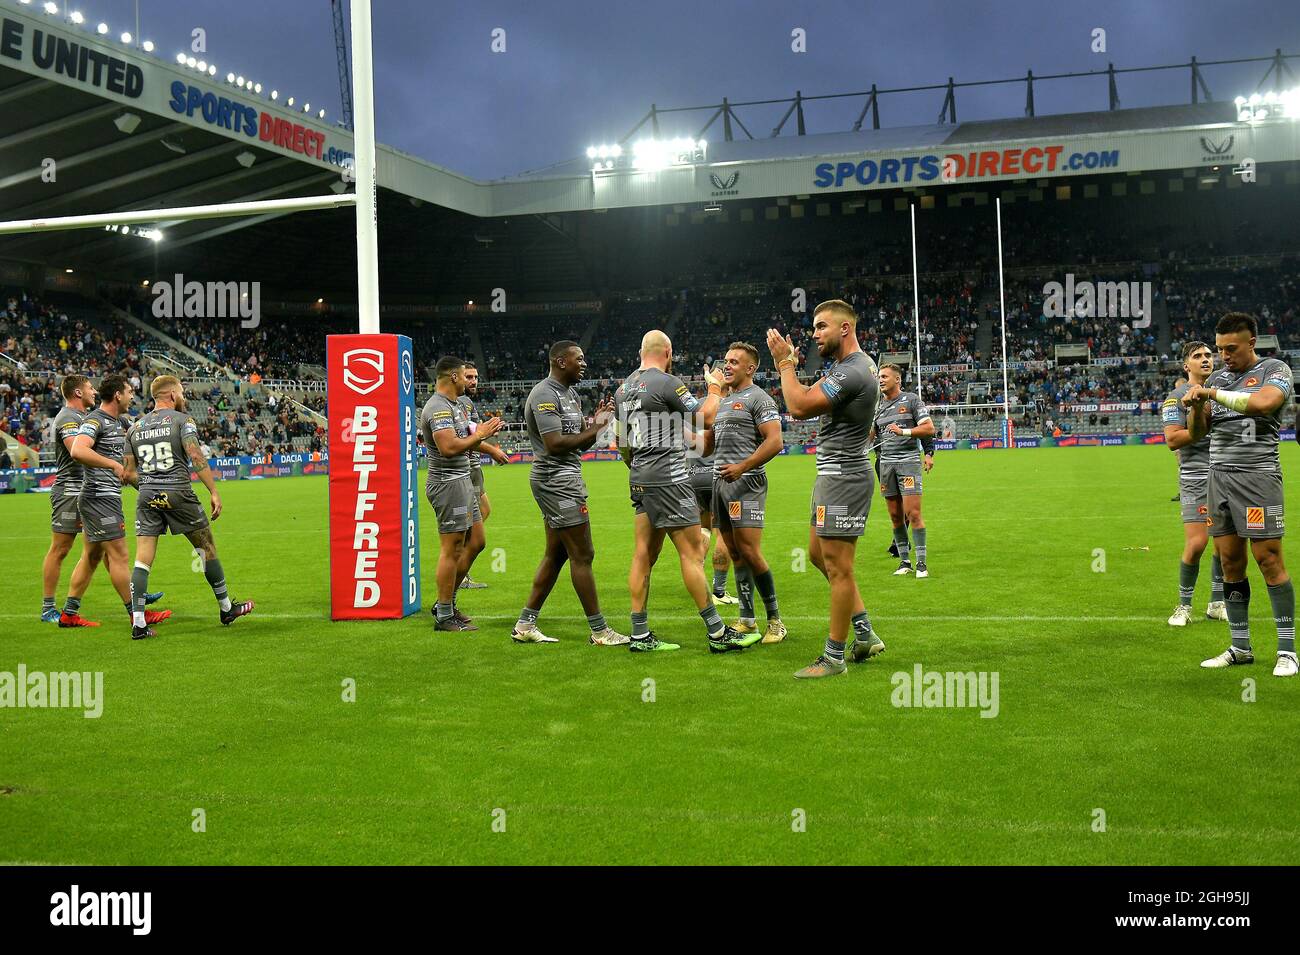 Dacia Magic Weekend Saturday 4th and 5th September 2021, Super League Rugby, St Helens v Catalans Dragons, St James Park stadium, Newcastle Upon Tyne Stock Photo